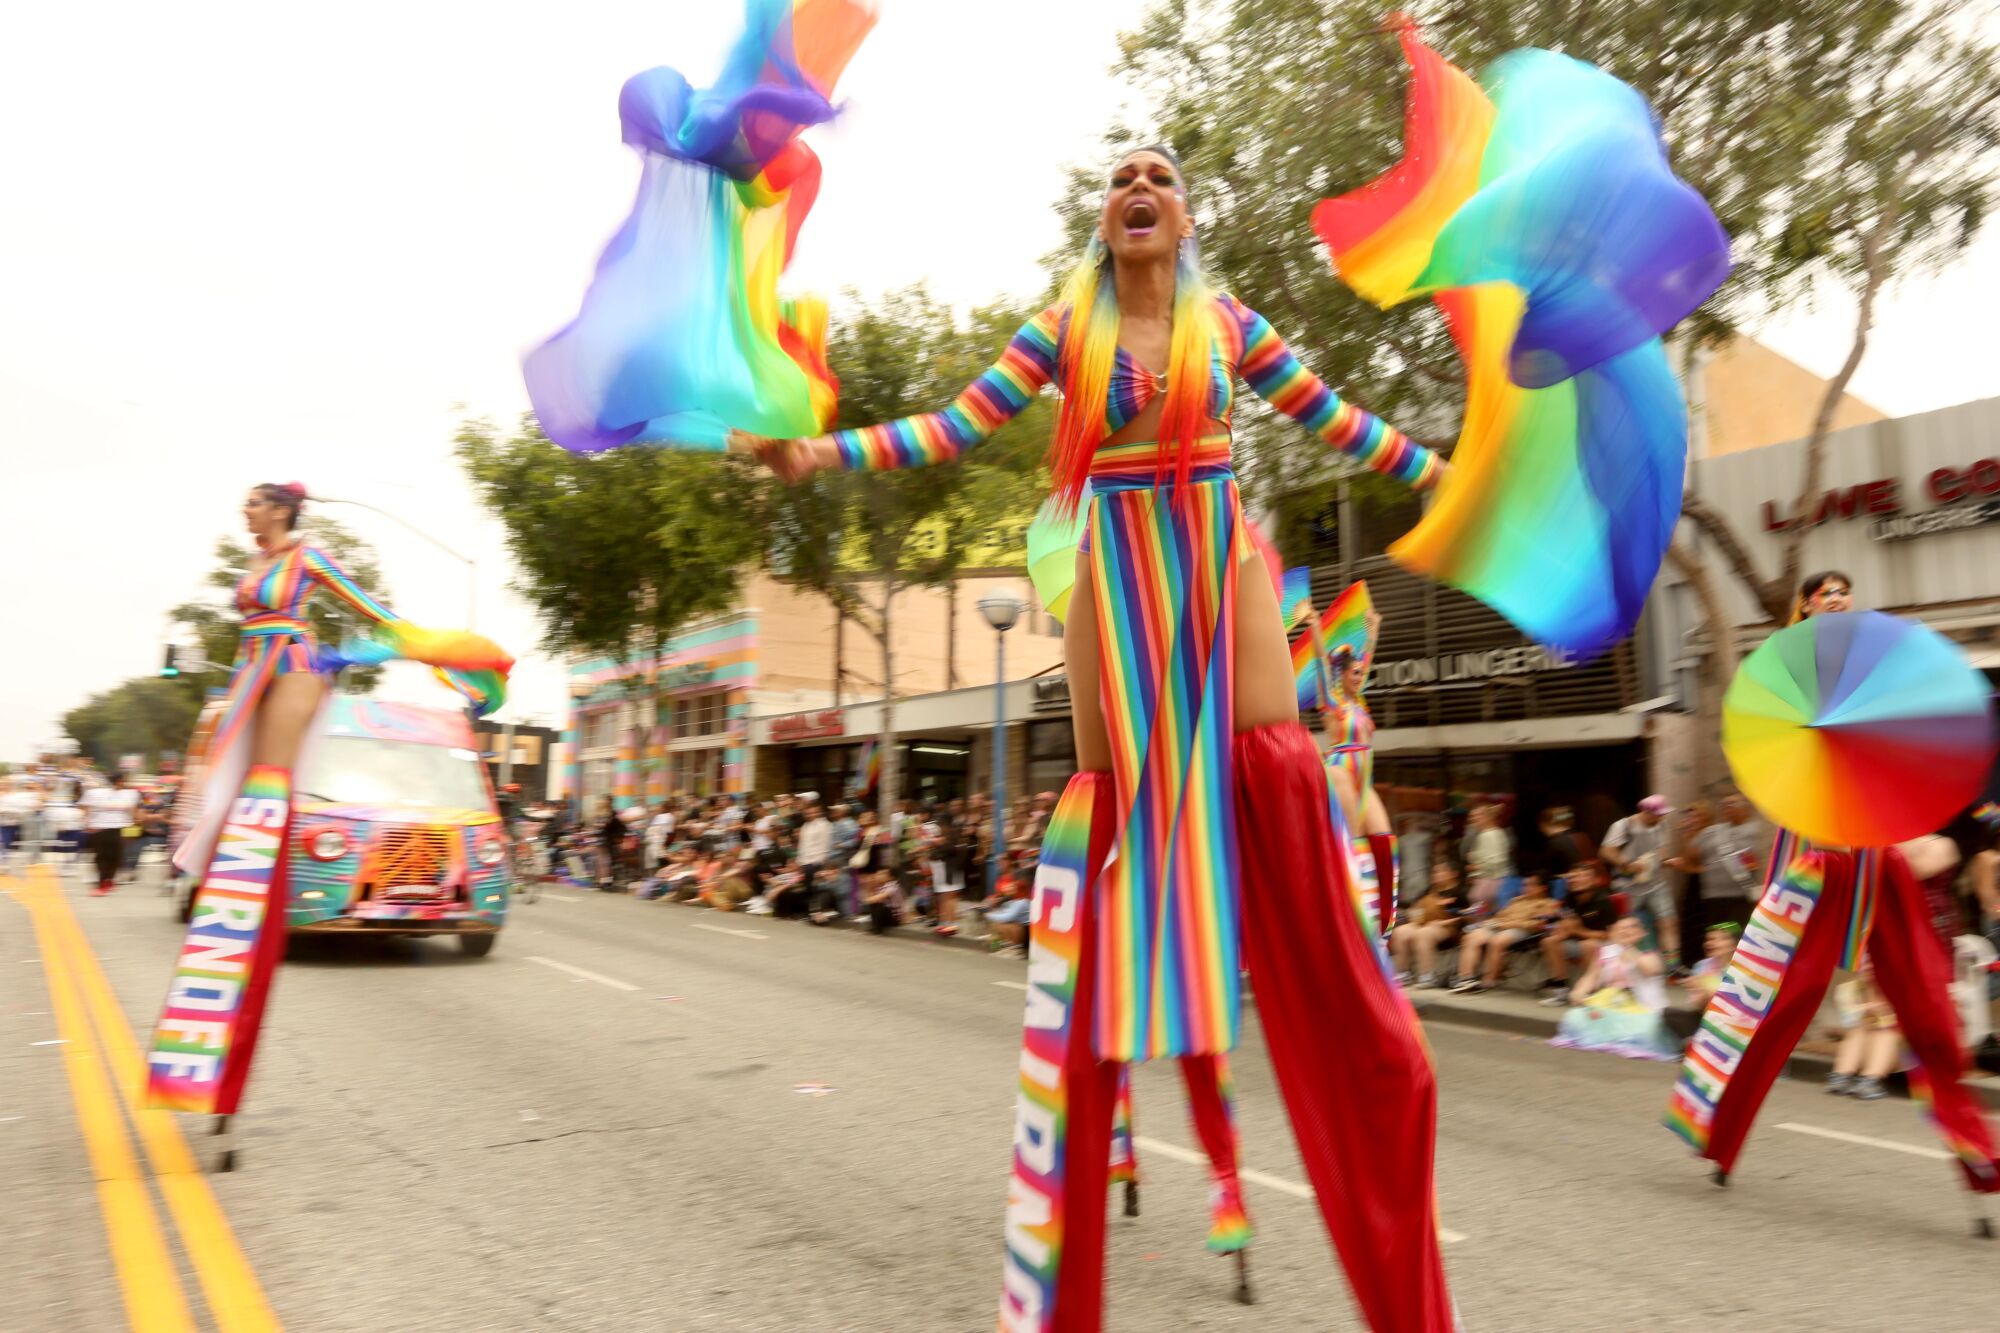 A person in rainbow clothing waves flags.